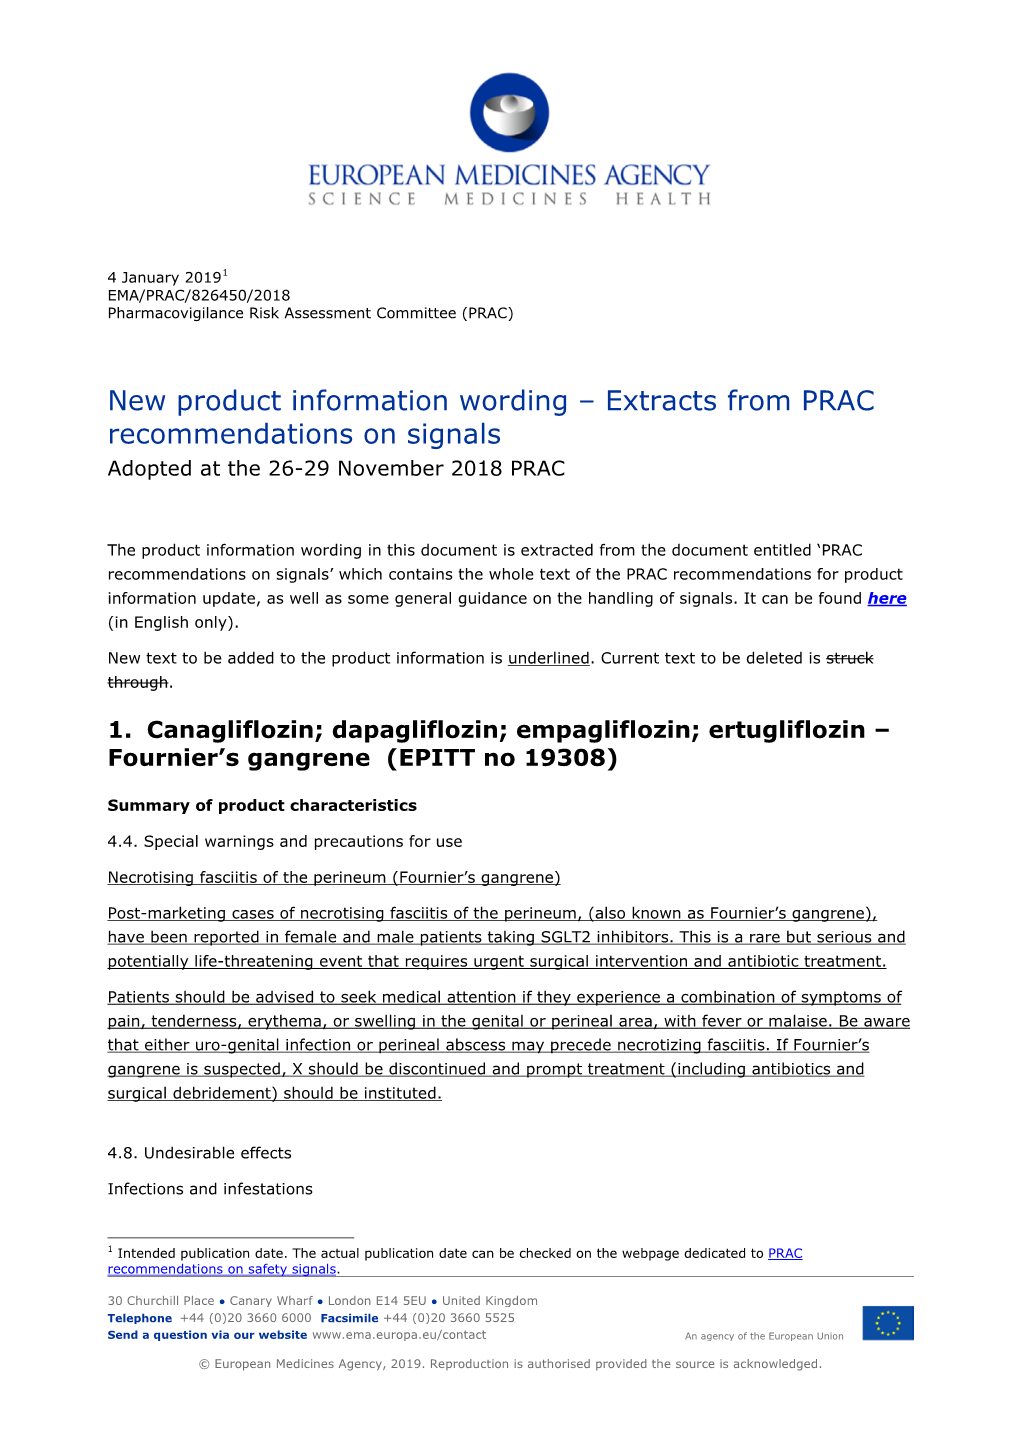 New Product Information Wording – Extracts from PRAC Recommendations on Signals Adopted at the 26-29 November 2018 PRAC